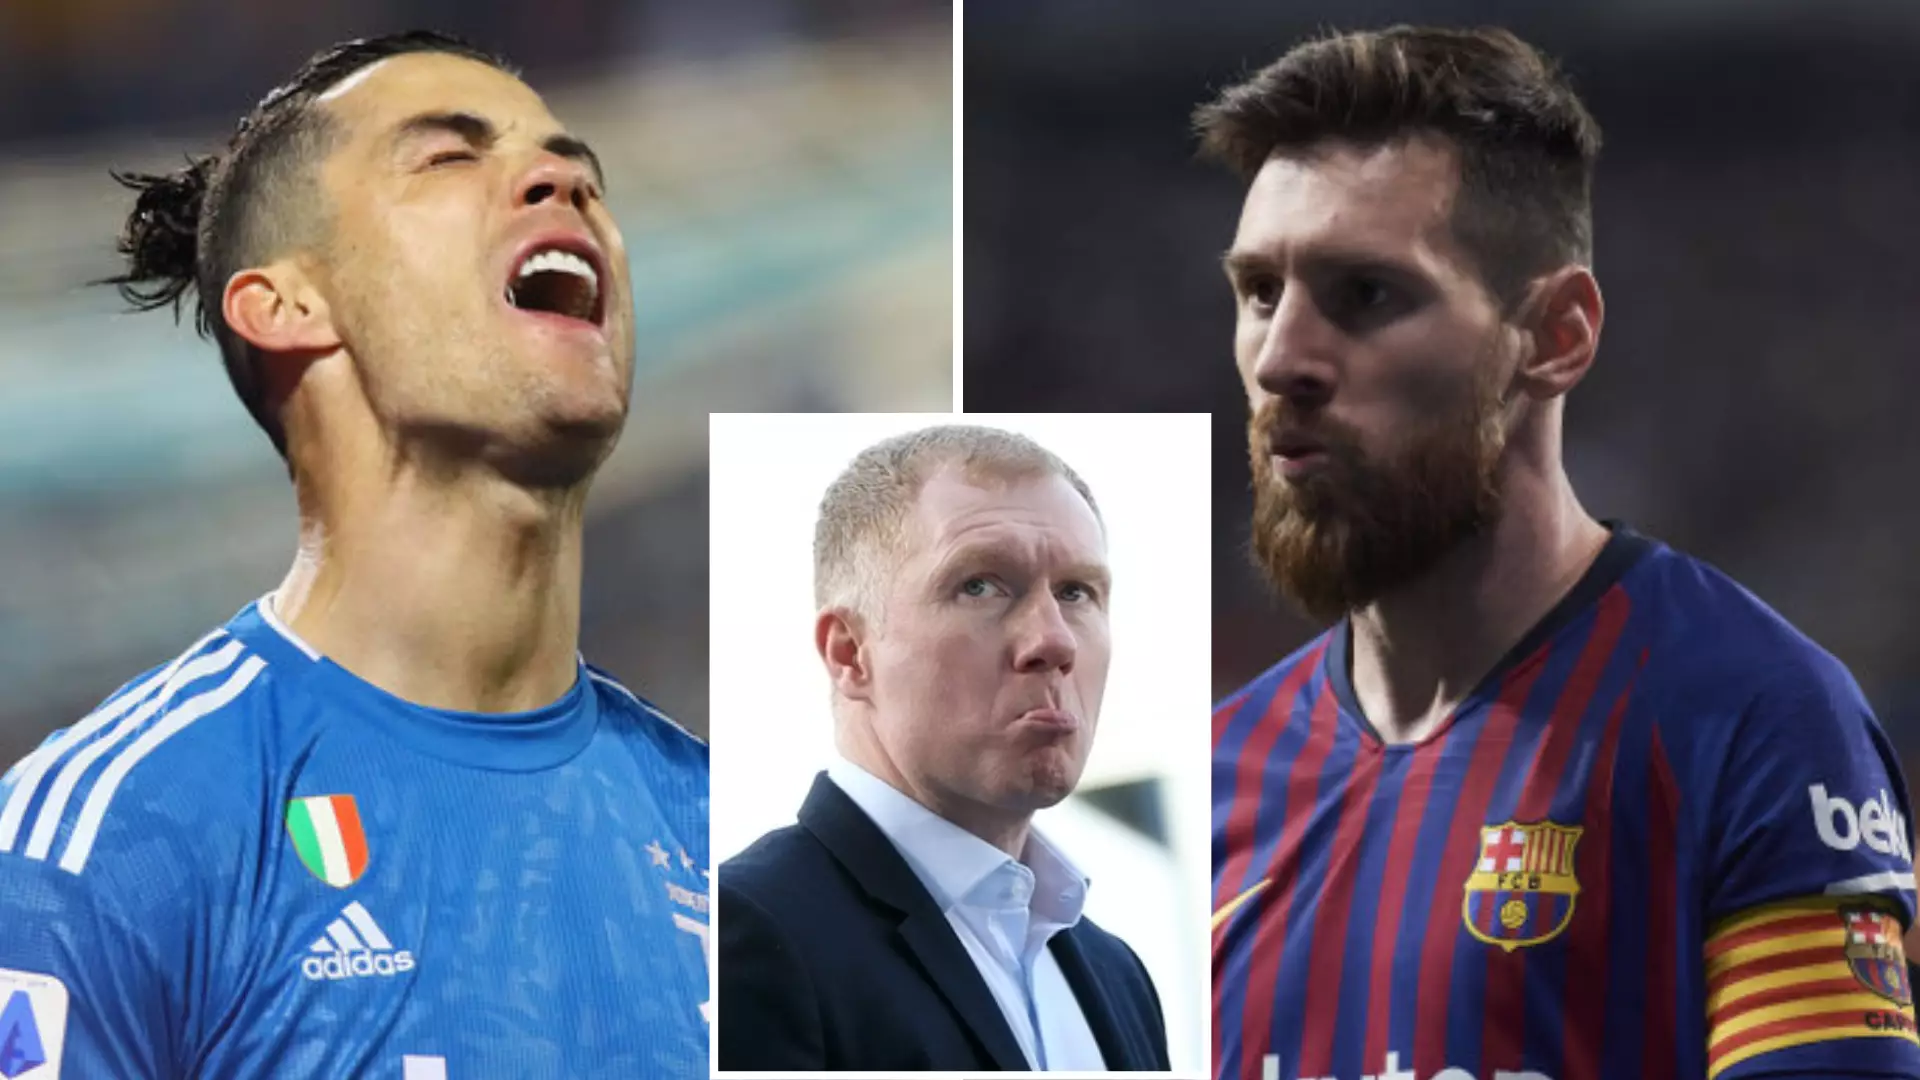 Paul Scholes Ends The Lionel Messi Vs Cristiano Ronaldo Debate Once And For All With Brilliant Verdict